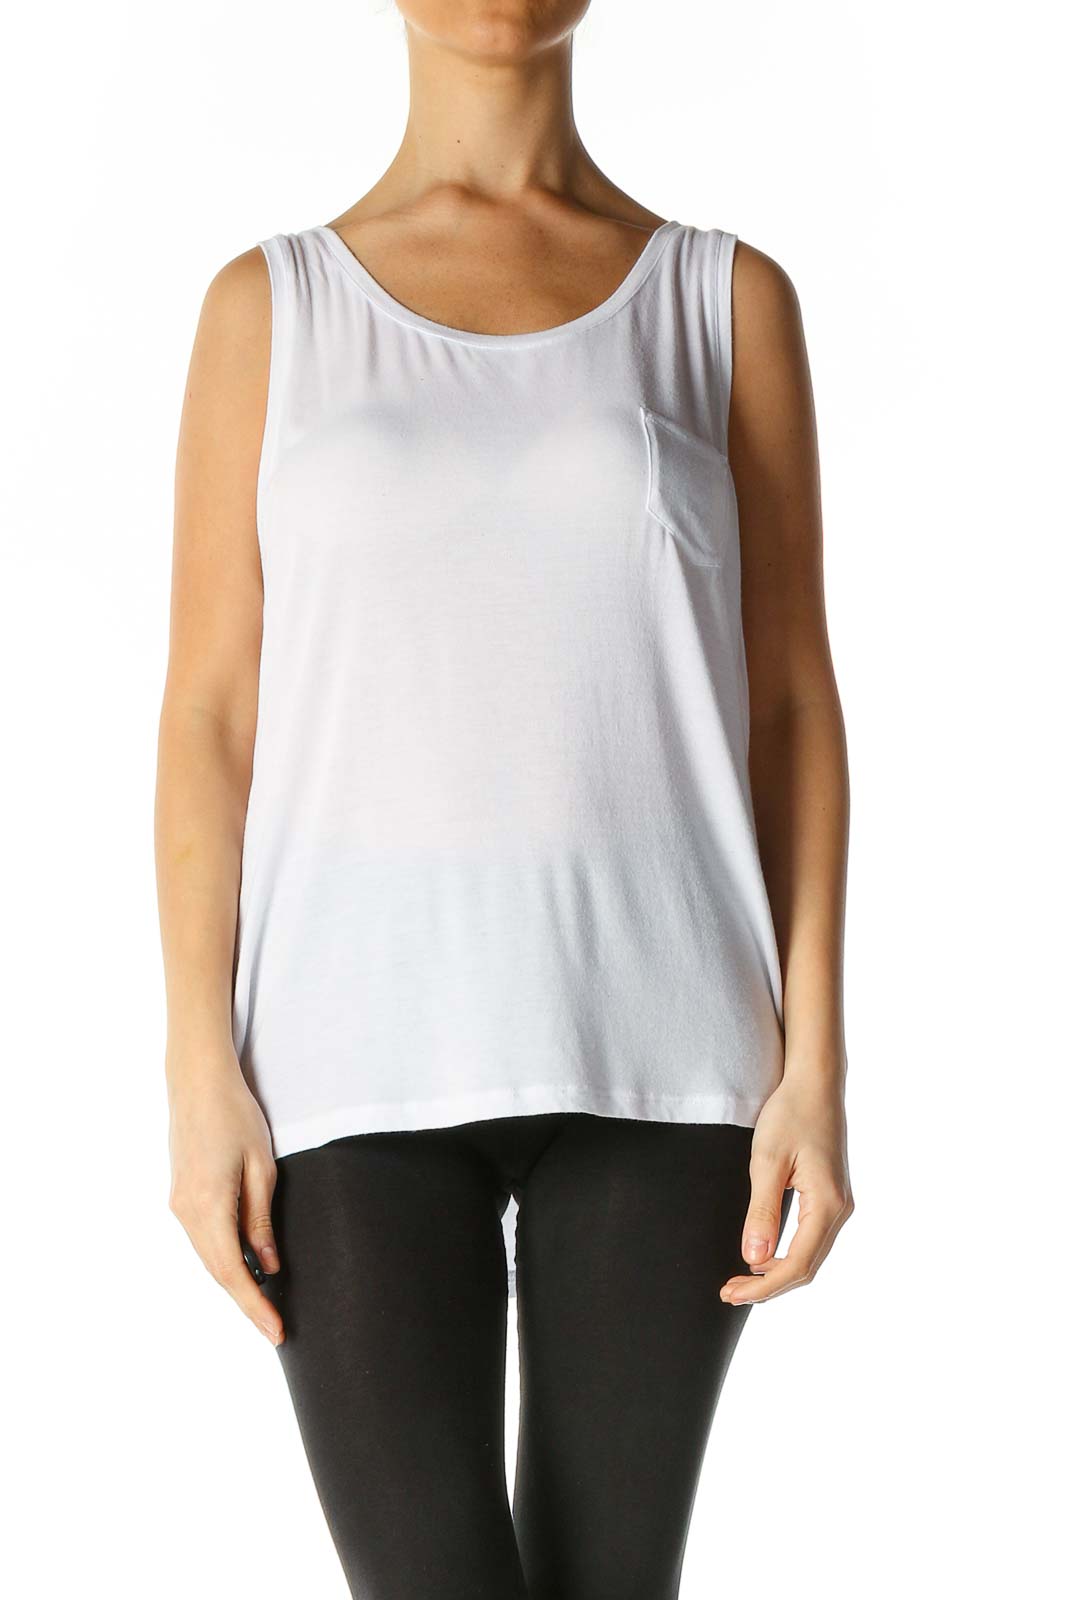 White Solid Casual Tank Top Front